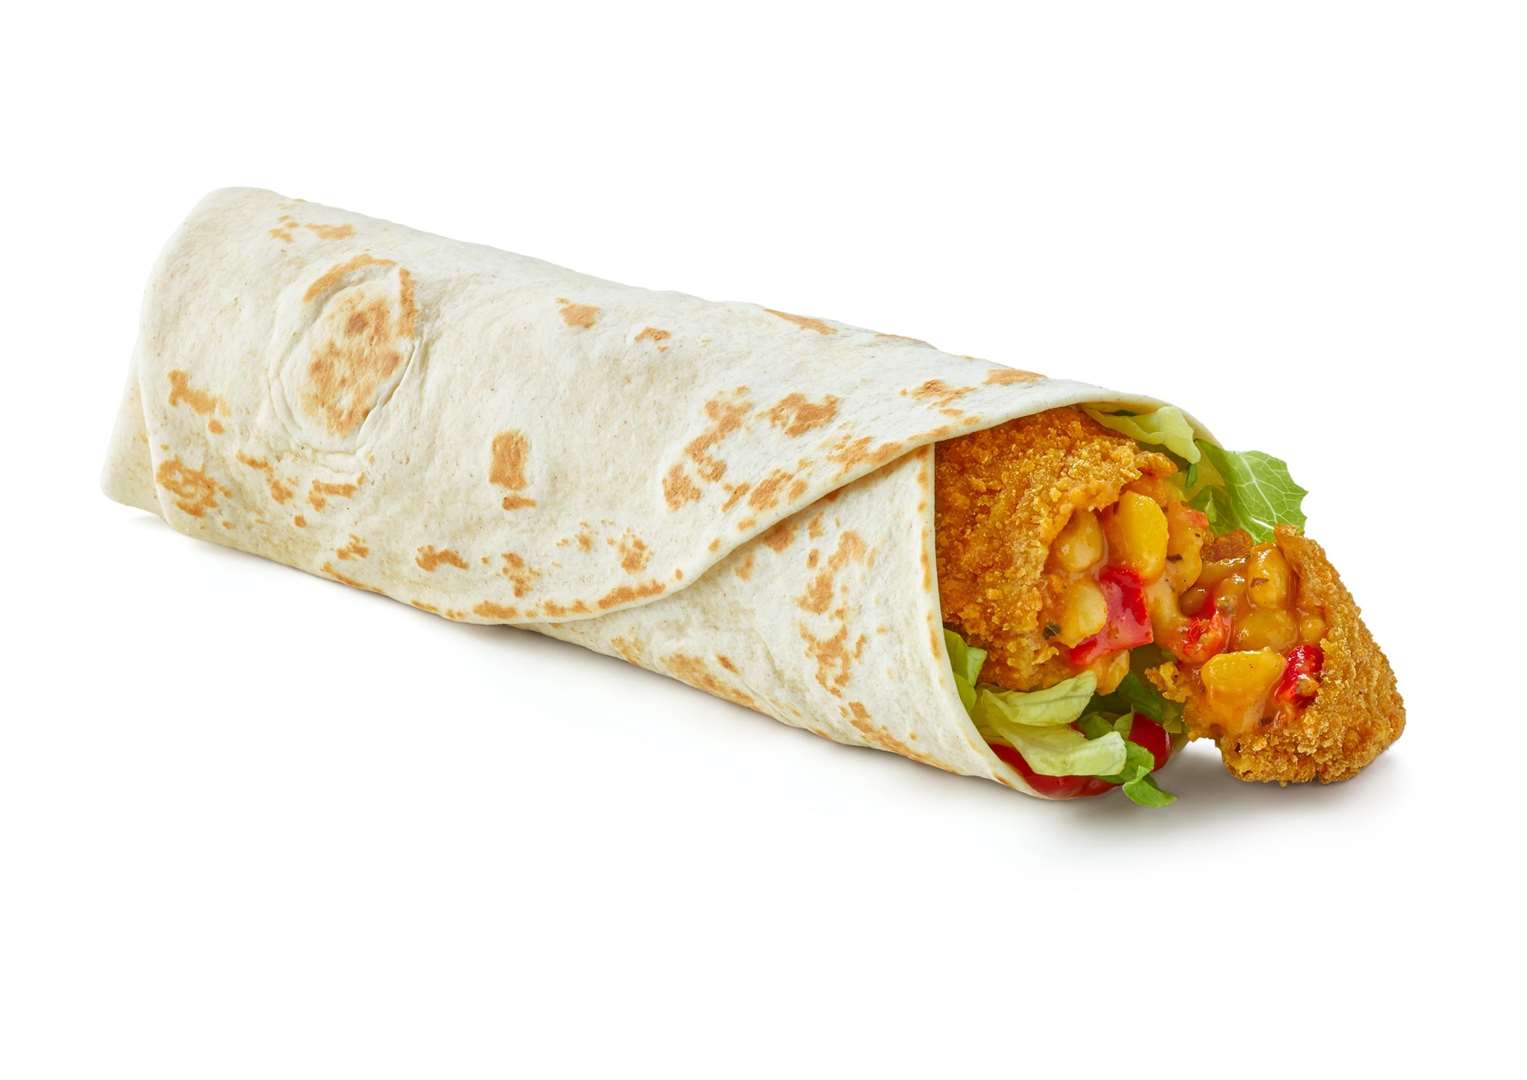 Spicy Veggie Wrap is also now available from its Kent outlets (6295017)